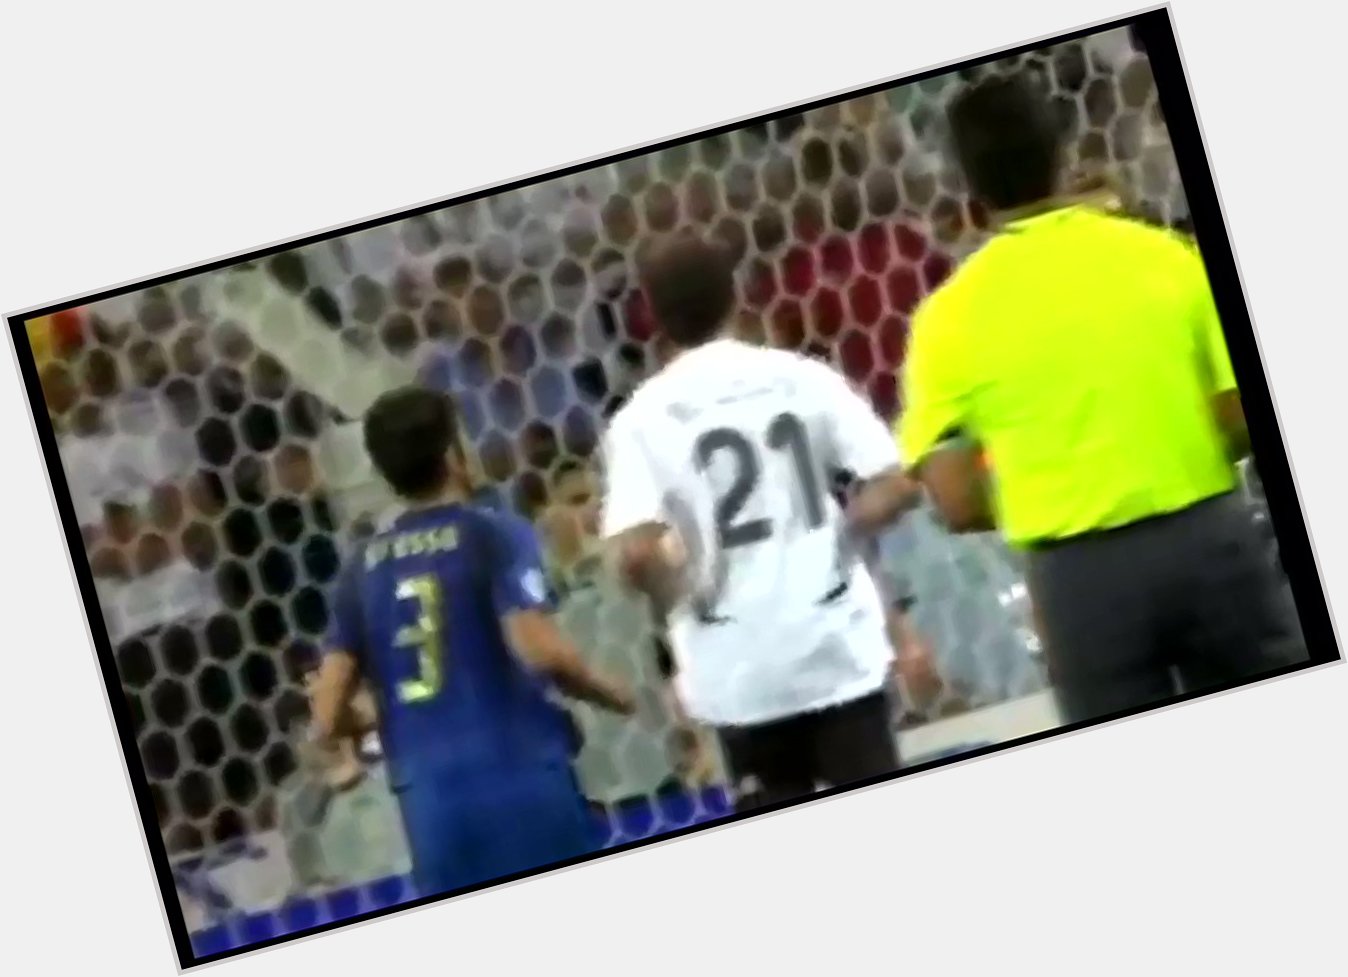  - Happy Birthday, Fabio Grosso. You basically united Italy with this goal in \06.

